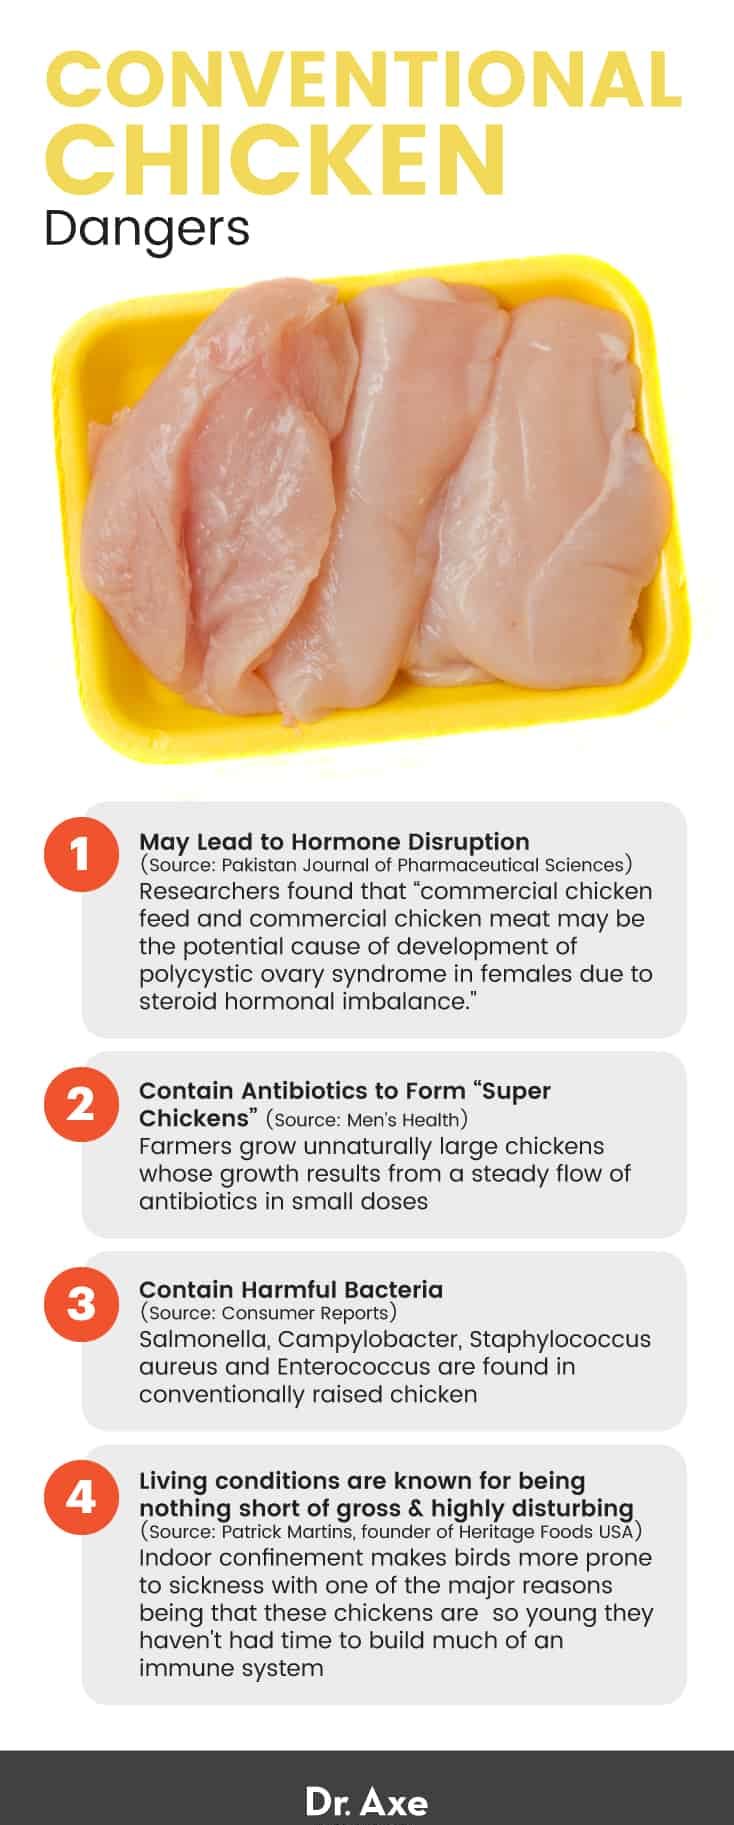 Conventional chicken dangers - Dr. Axe